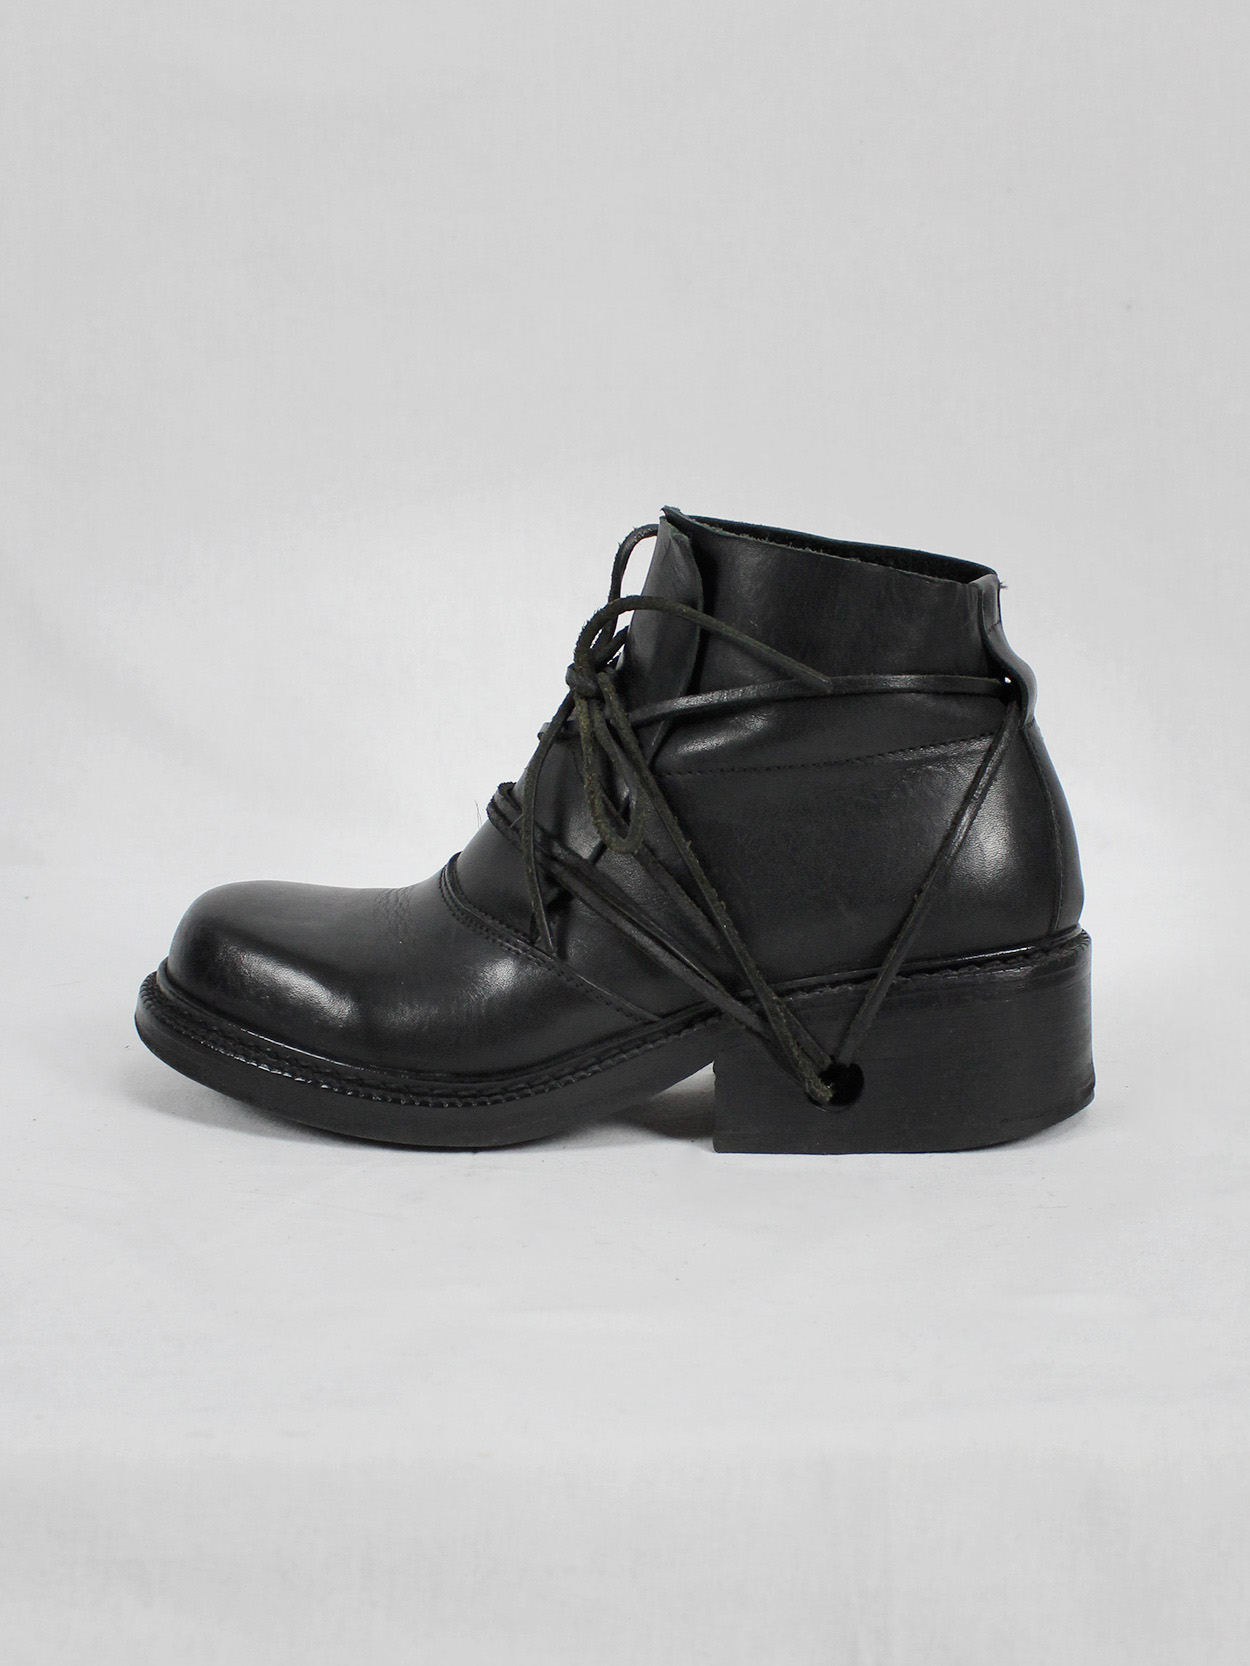 vaniitas vintage Dirk Bikkembergs black boots with laces through the soles fall 1994 7996